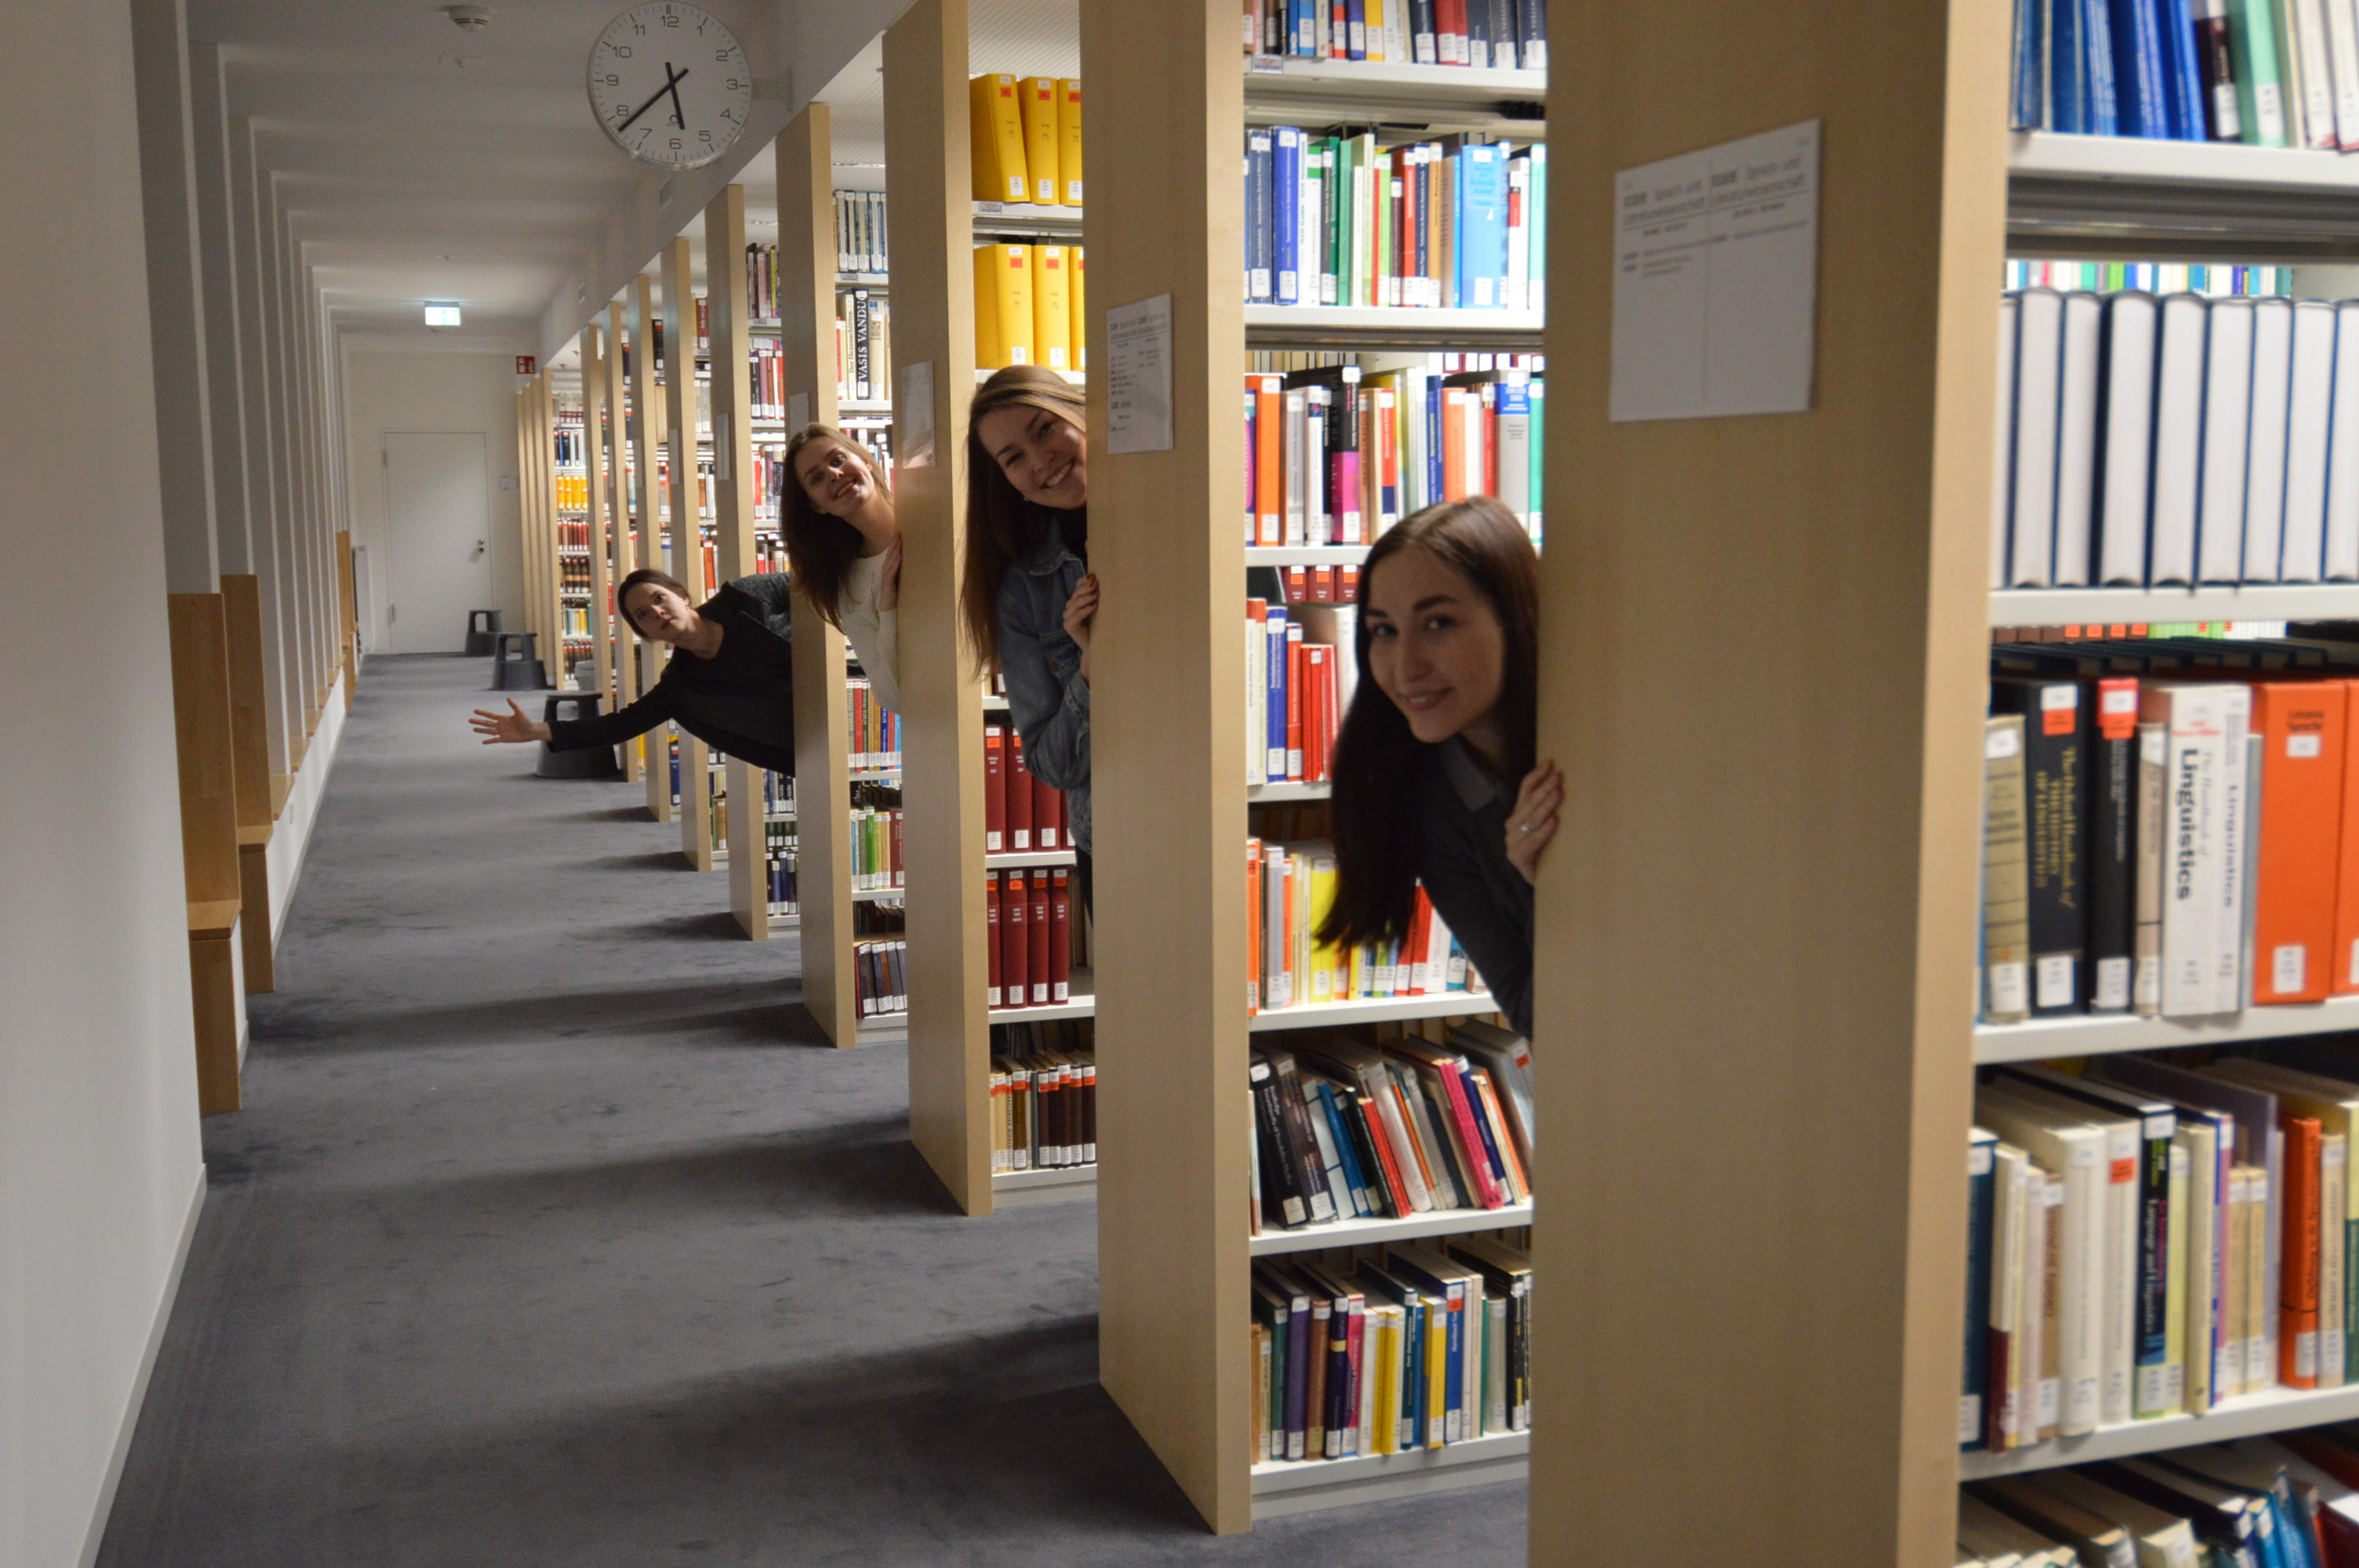 Master’s students from St. Petersburg in the University of Greifswald’s Departmental Library, 2019 - Photo: Polina Kondratenko 